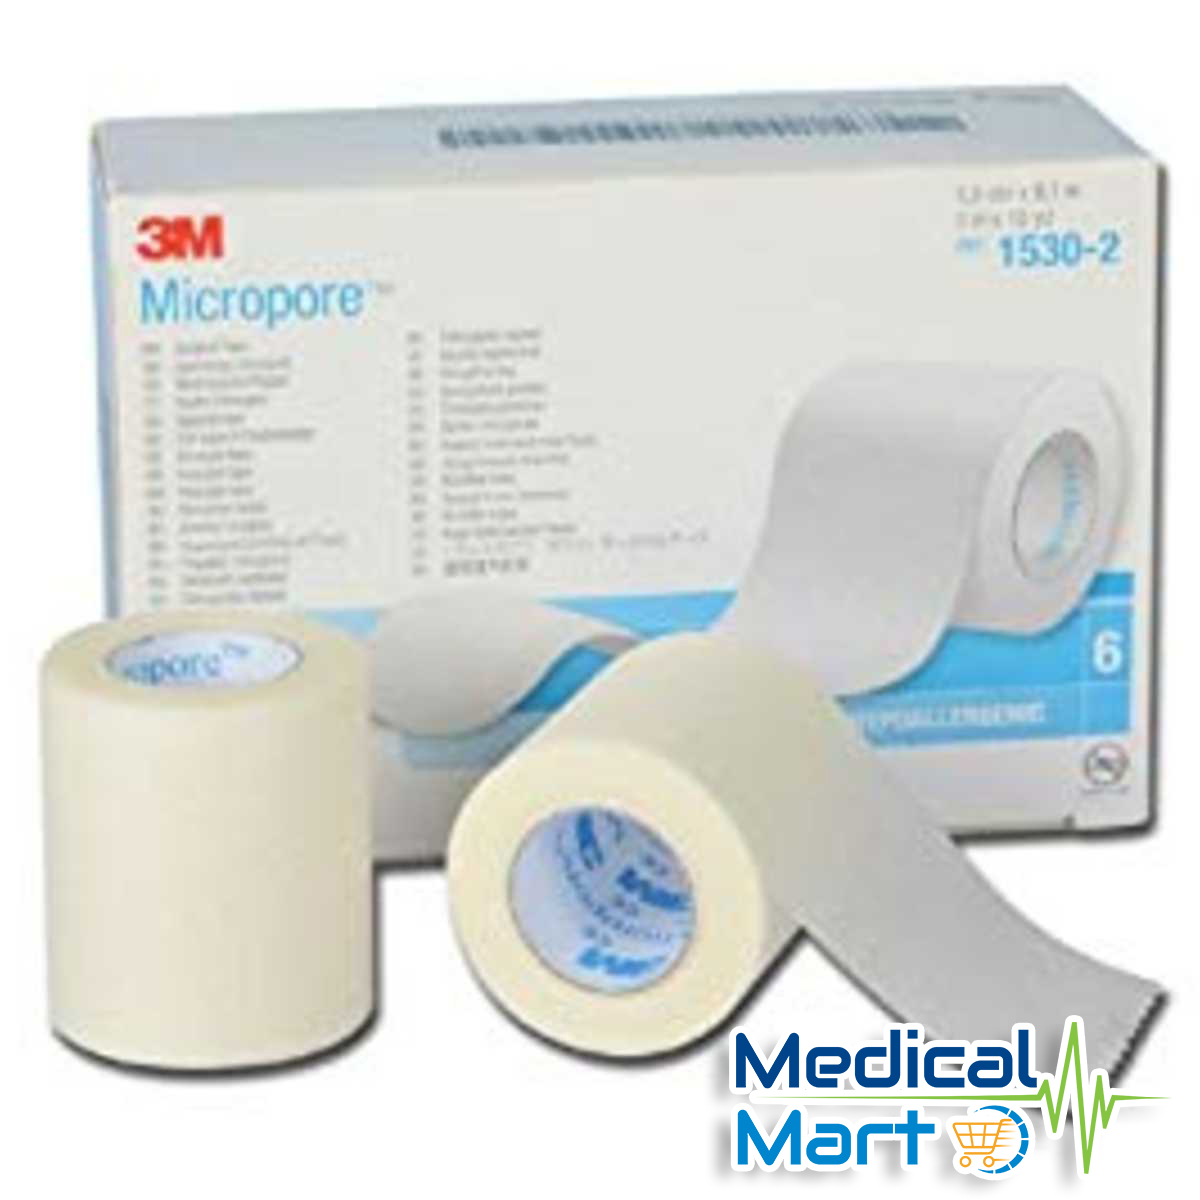 3m Micropore Paper Surgical Tape 5cm x 9.14m (2in x 10yds)